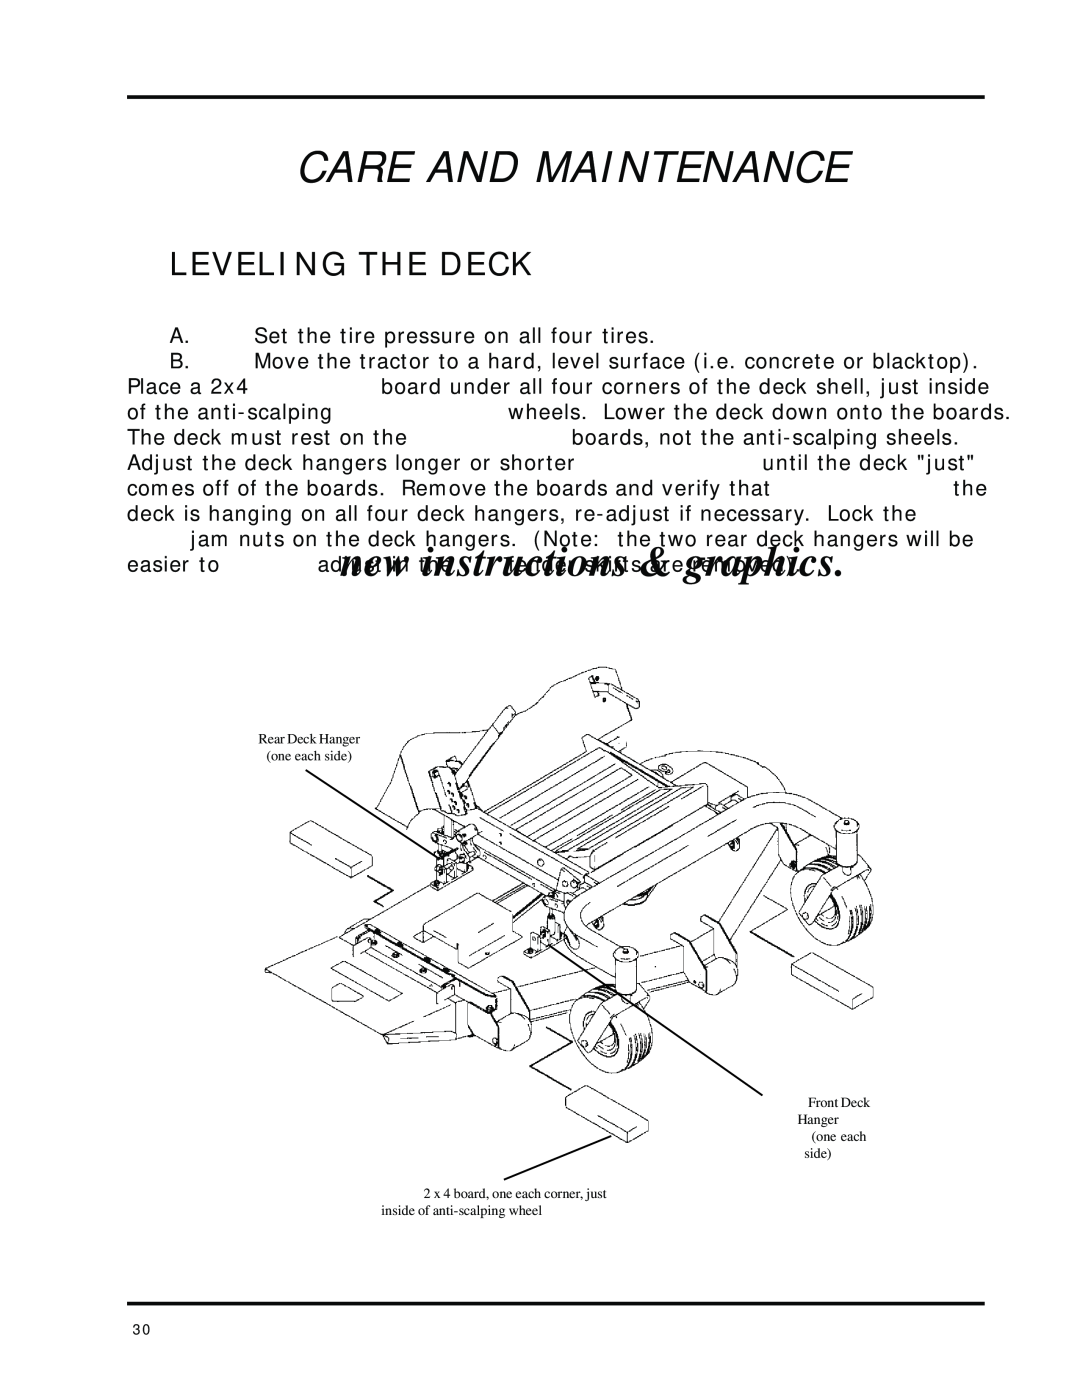 Dixon 8000 Series manual new instructions & graphics, Leveling The Deck, Care And Maintenance 